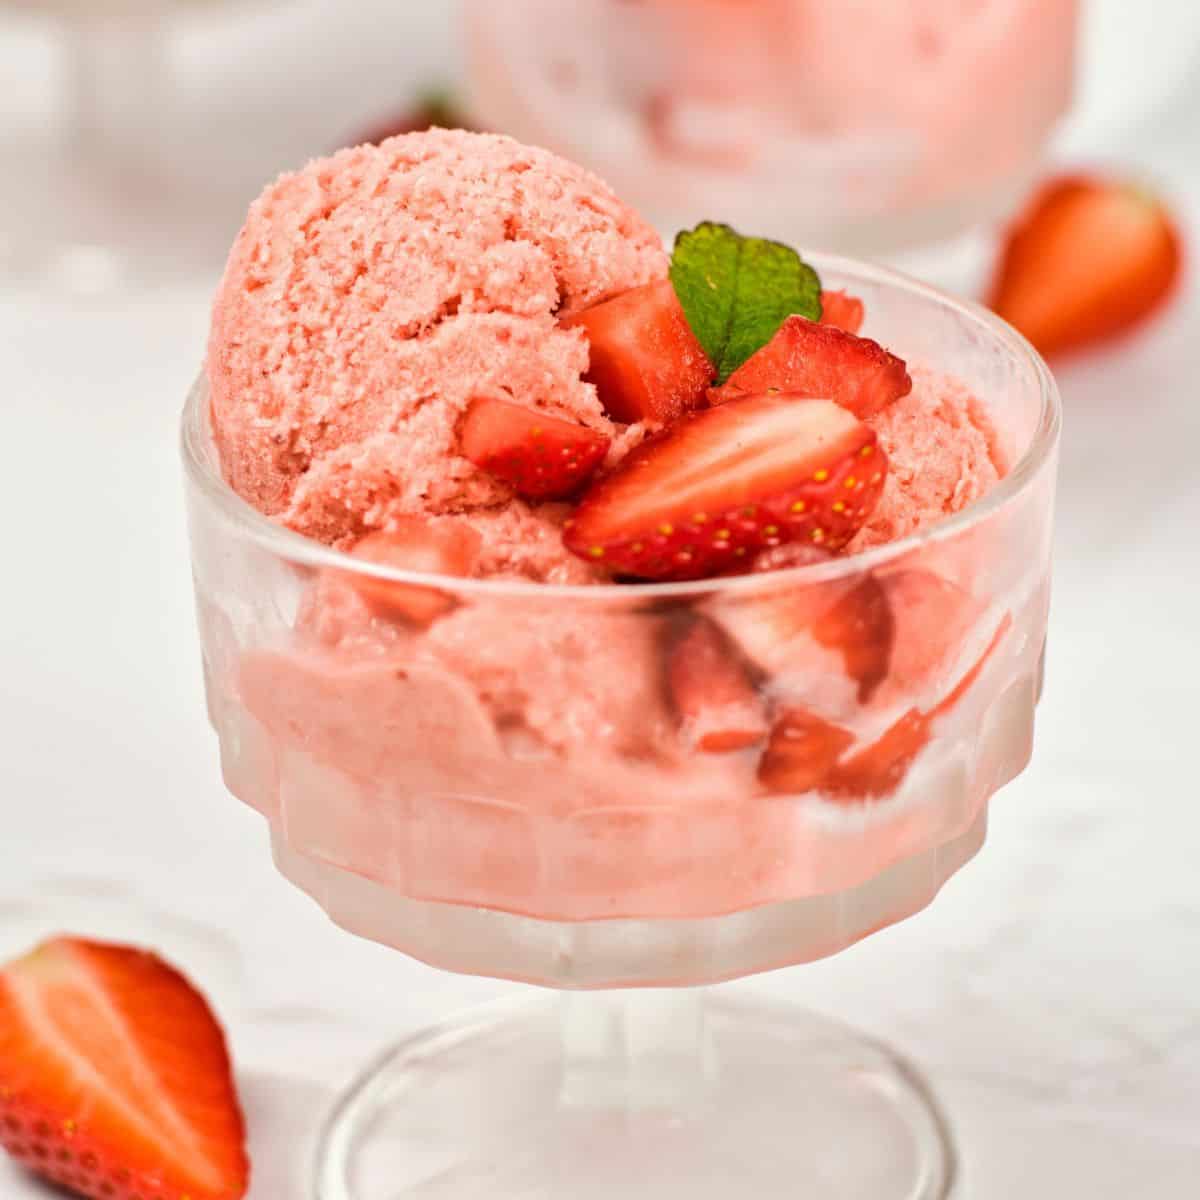 3 Ingredient Vegan Strawberry Ice Cream, a simple and delicious recipe that can be made in minutes. With and without coconut.